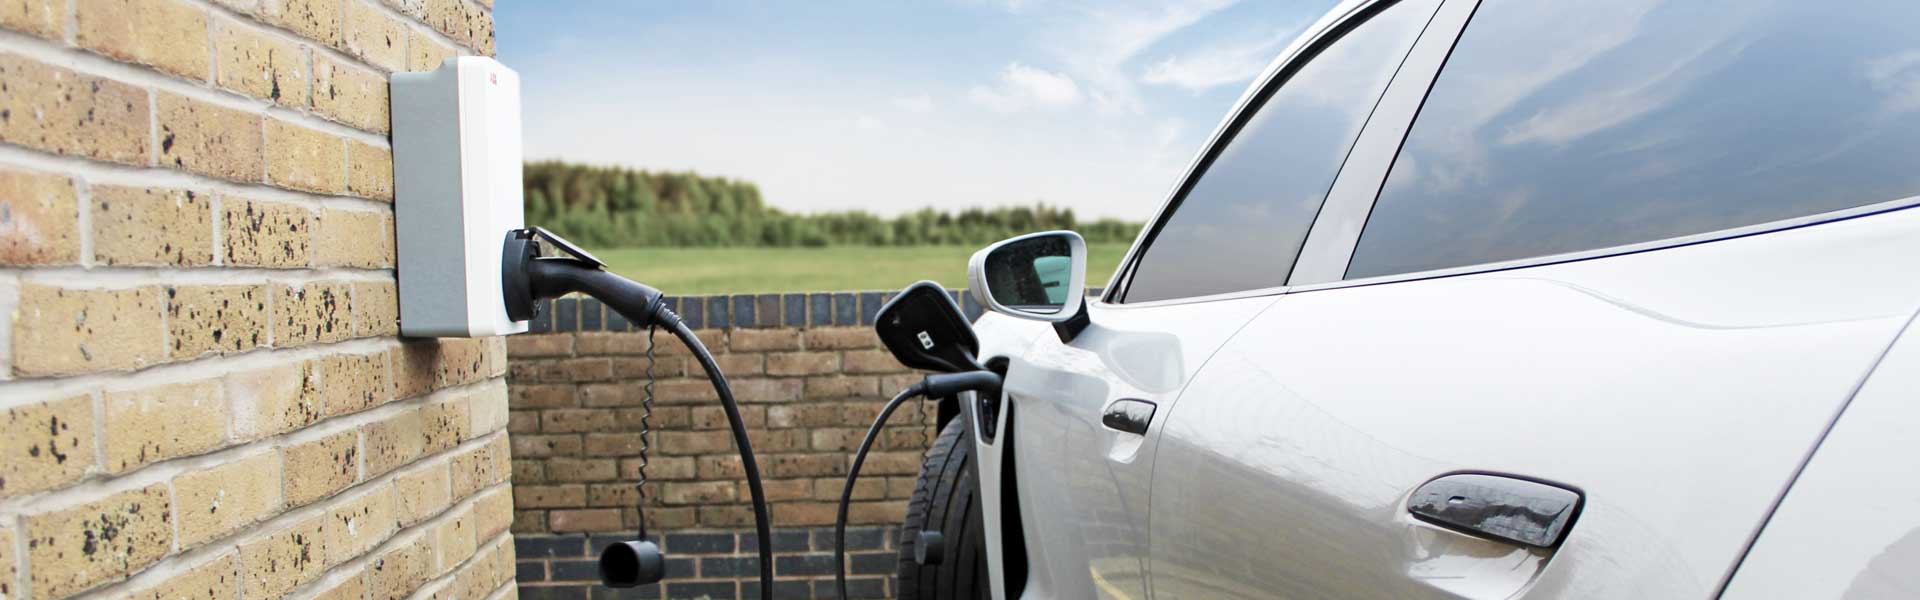 Electric Vehicle chargers car